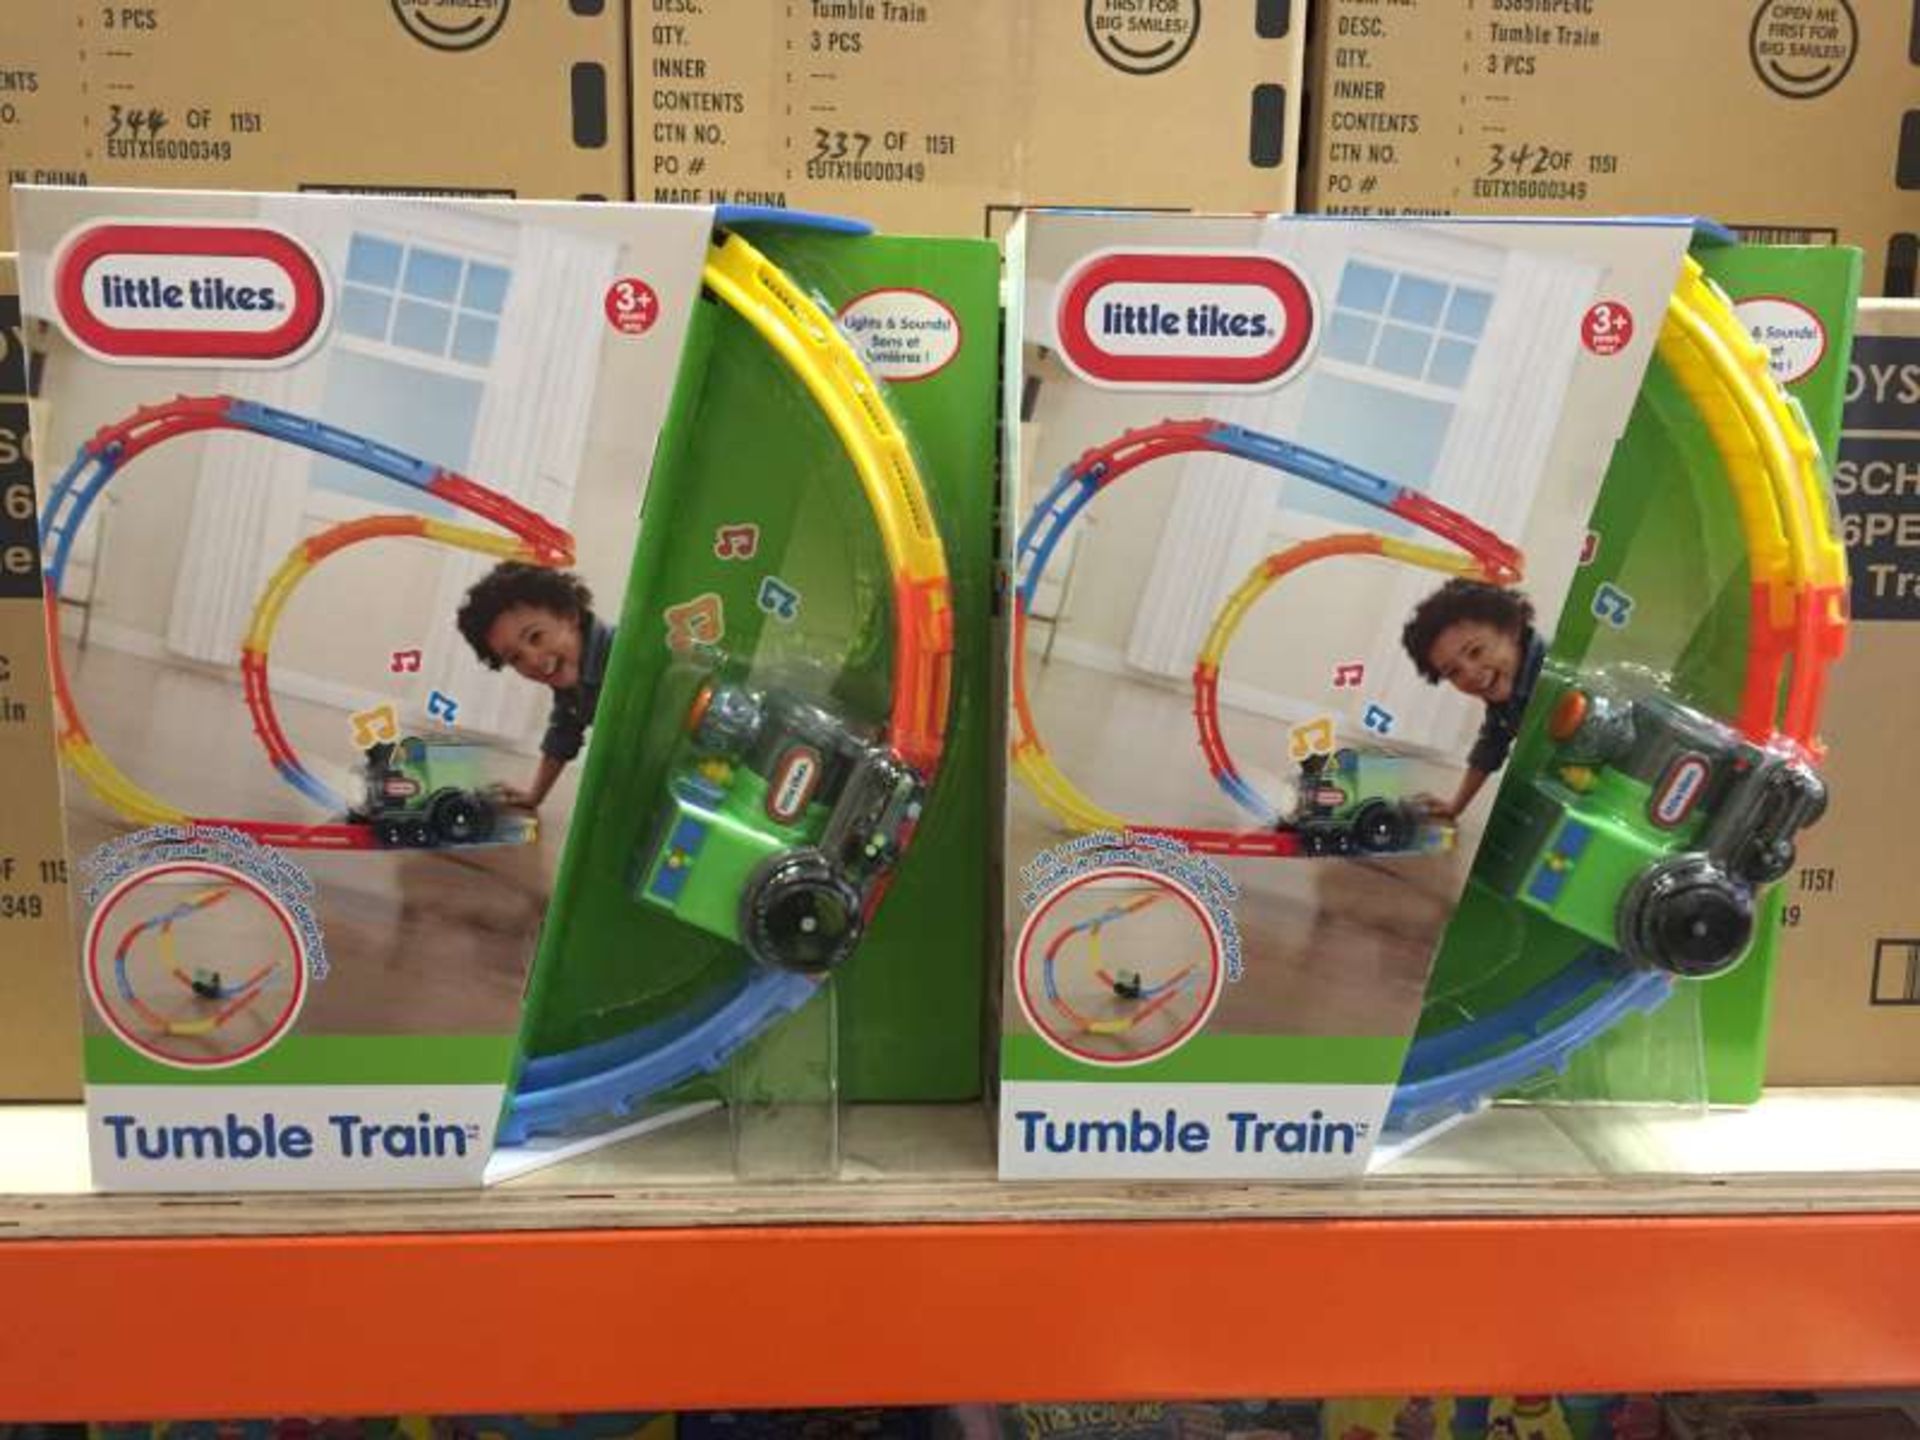 24 X BRAND NEW BOXED LITTLE TIKES TUMBLE TRAINS IN 8 BOXES